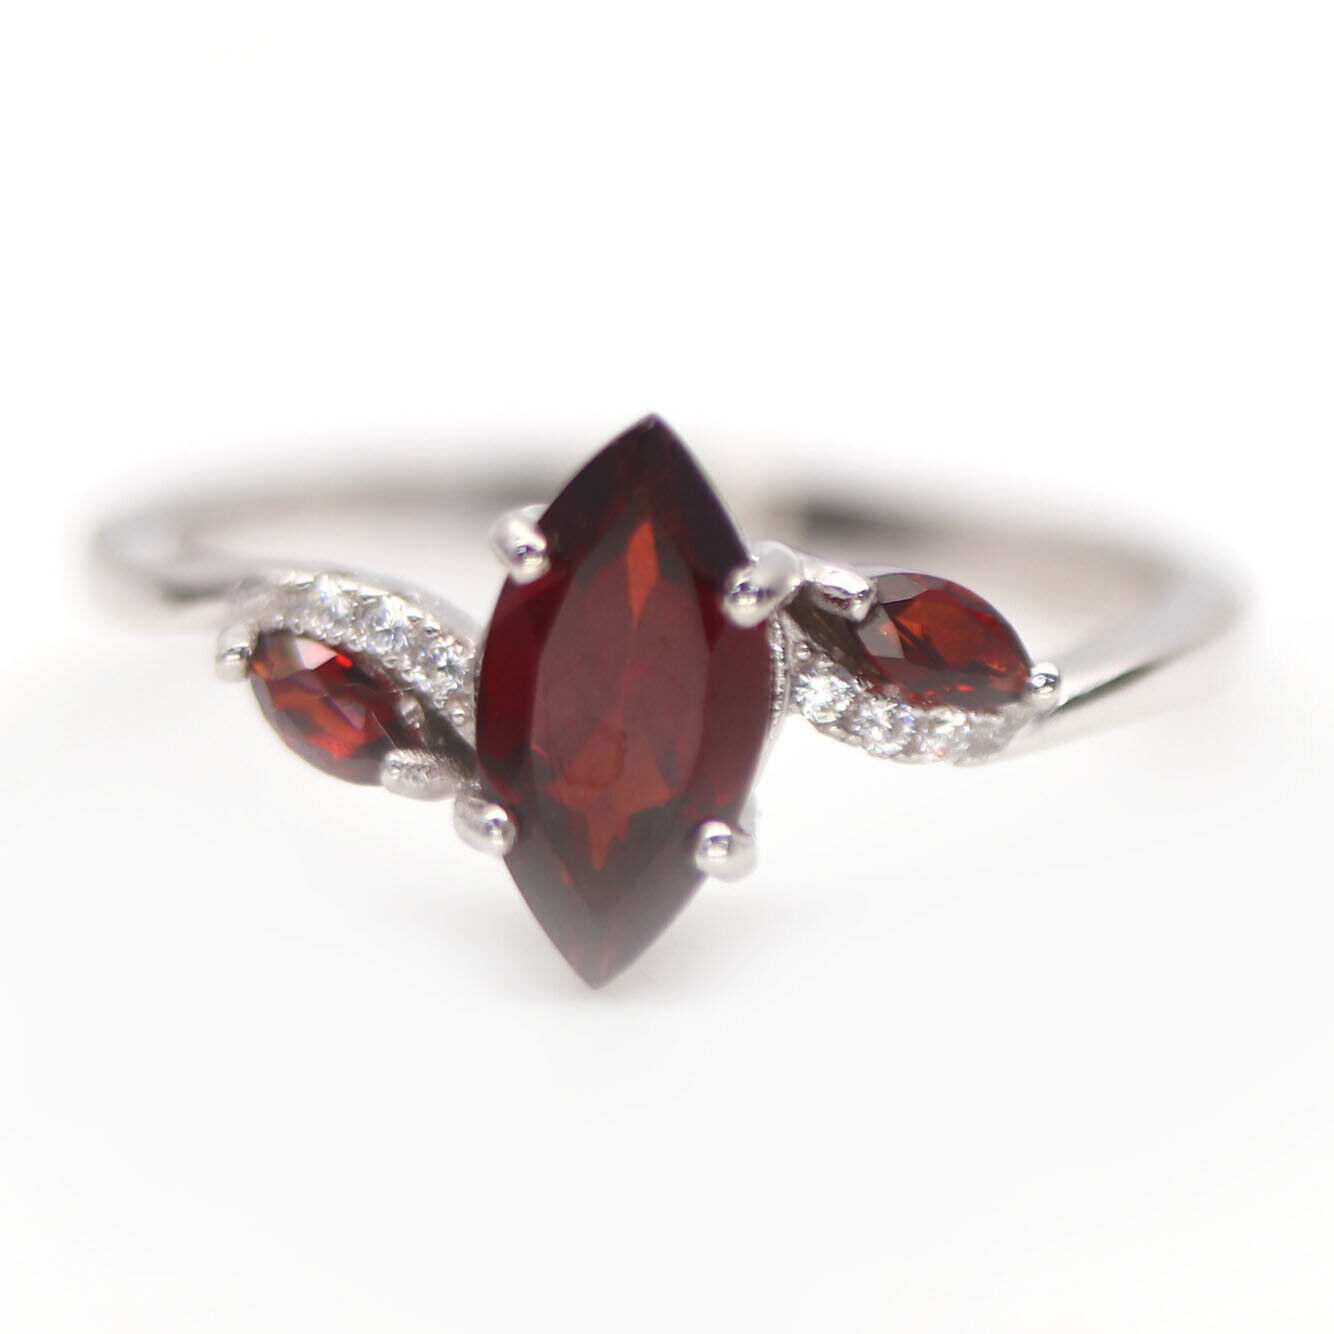 A 925 silver ring set with marquise cut garnet and white stones, (N.5).